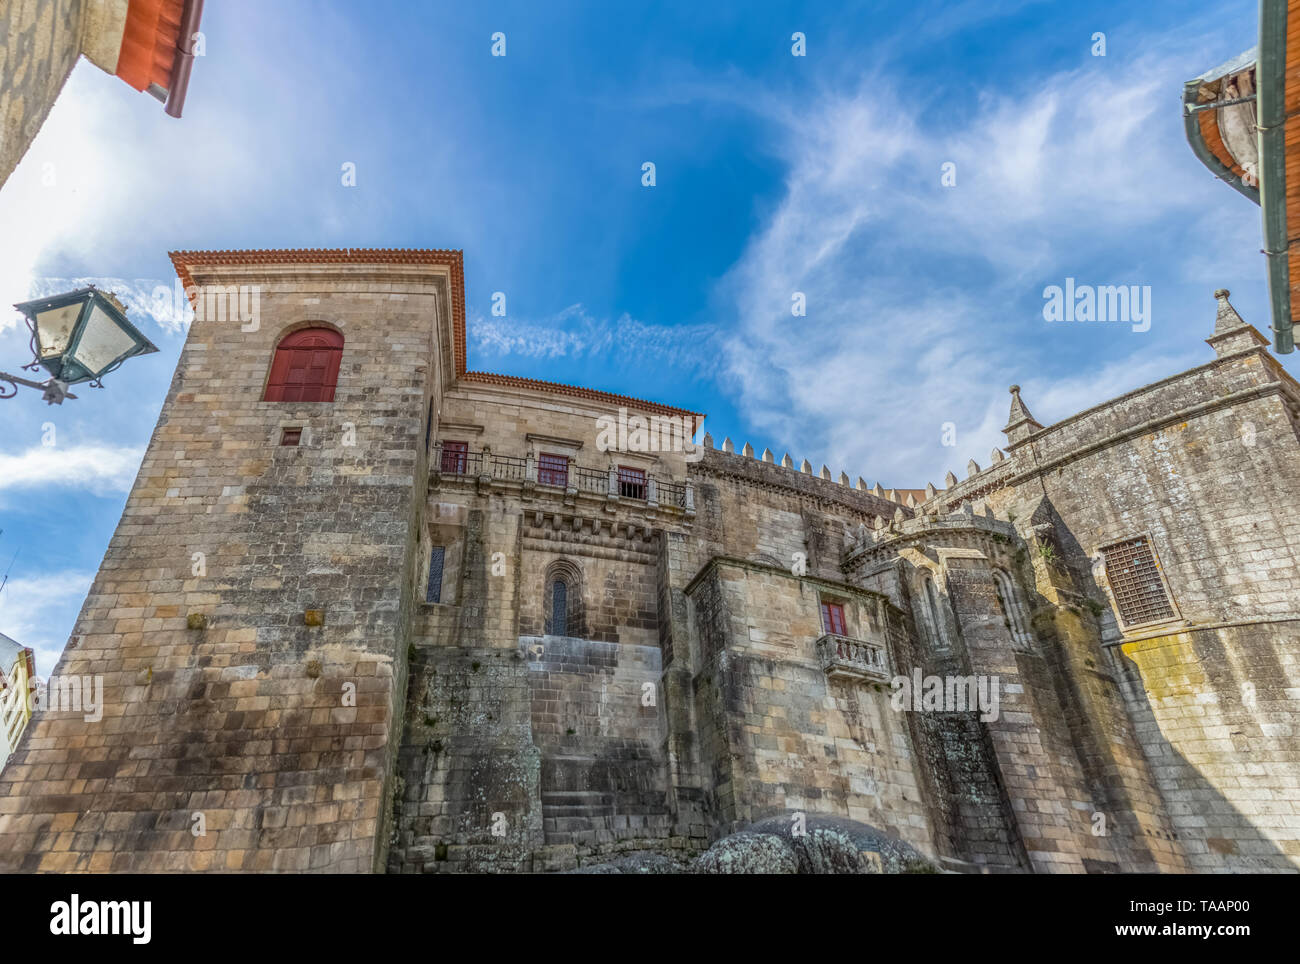 Viseu / Portugal - 04 16 2019 : Detailed view at the back facade of the Cathedral of Viseu, Sé Cathedral de Viseu, architectural icon of the city of V Stock Photo